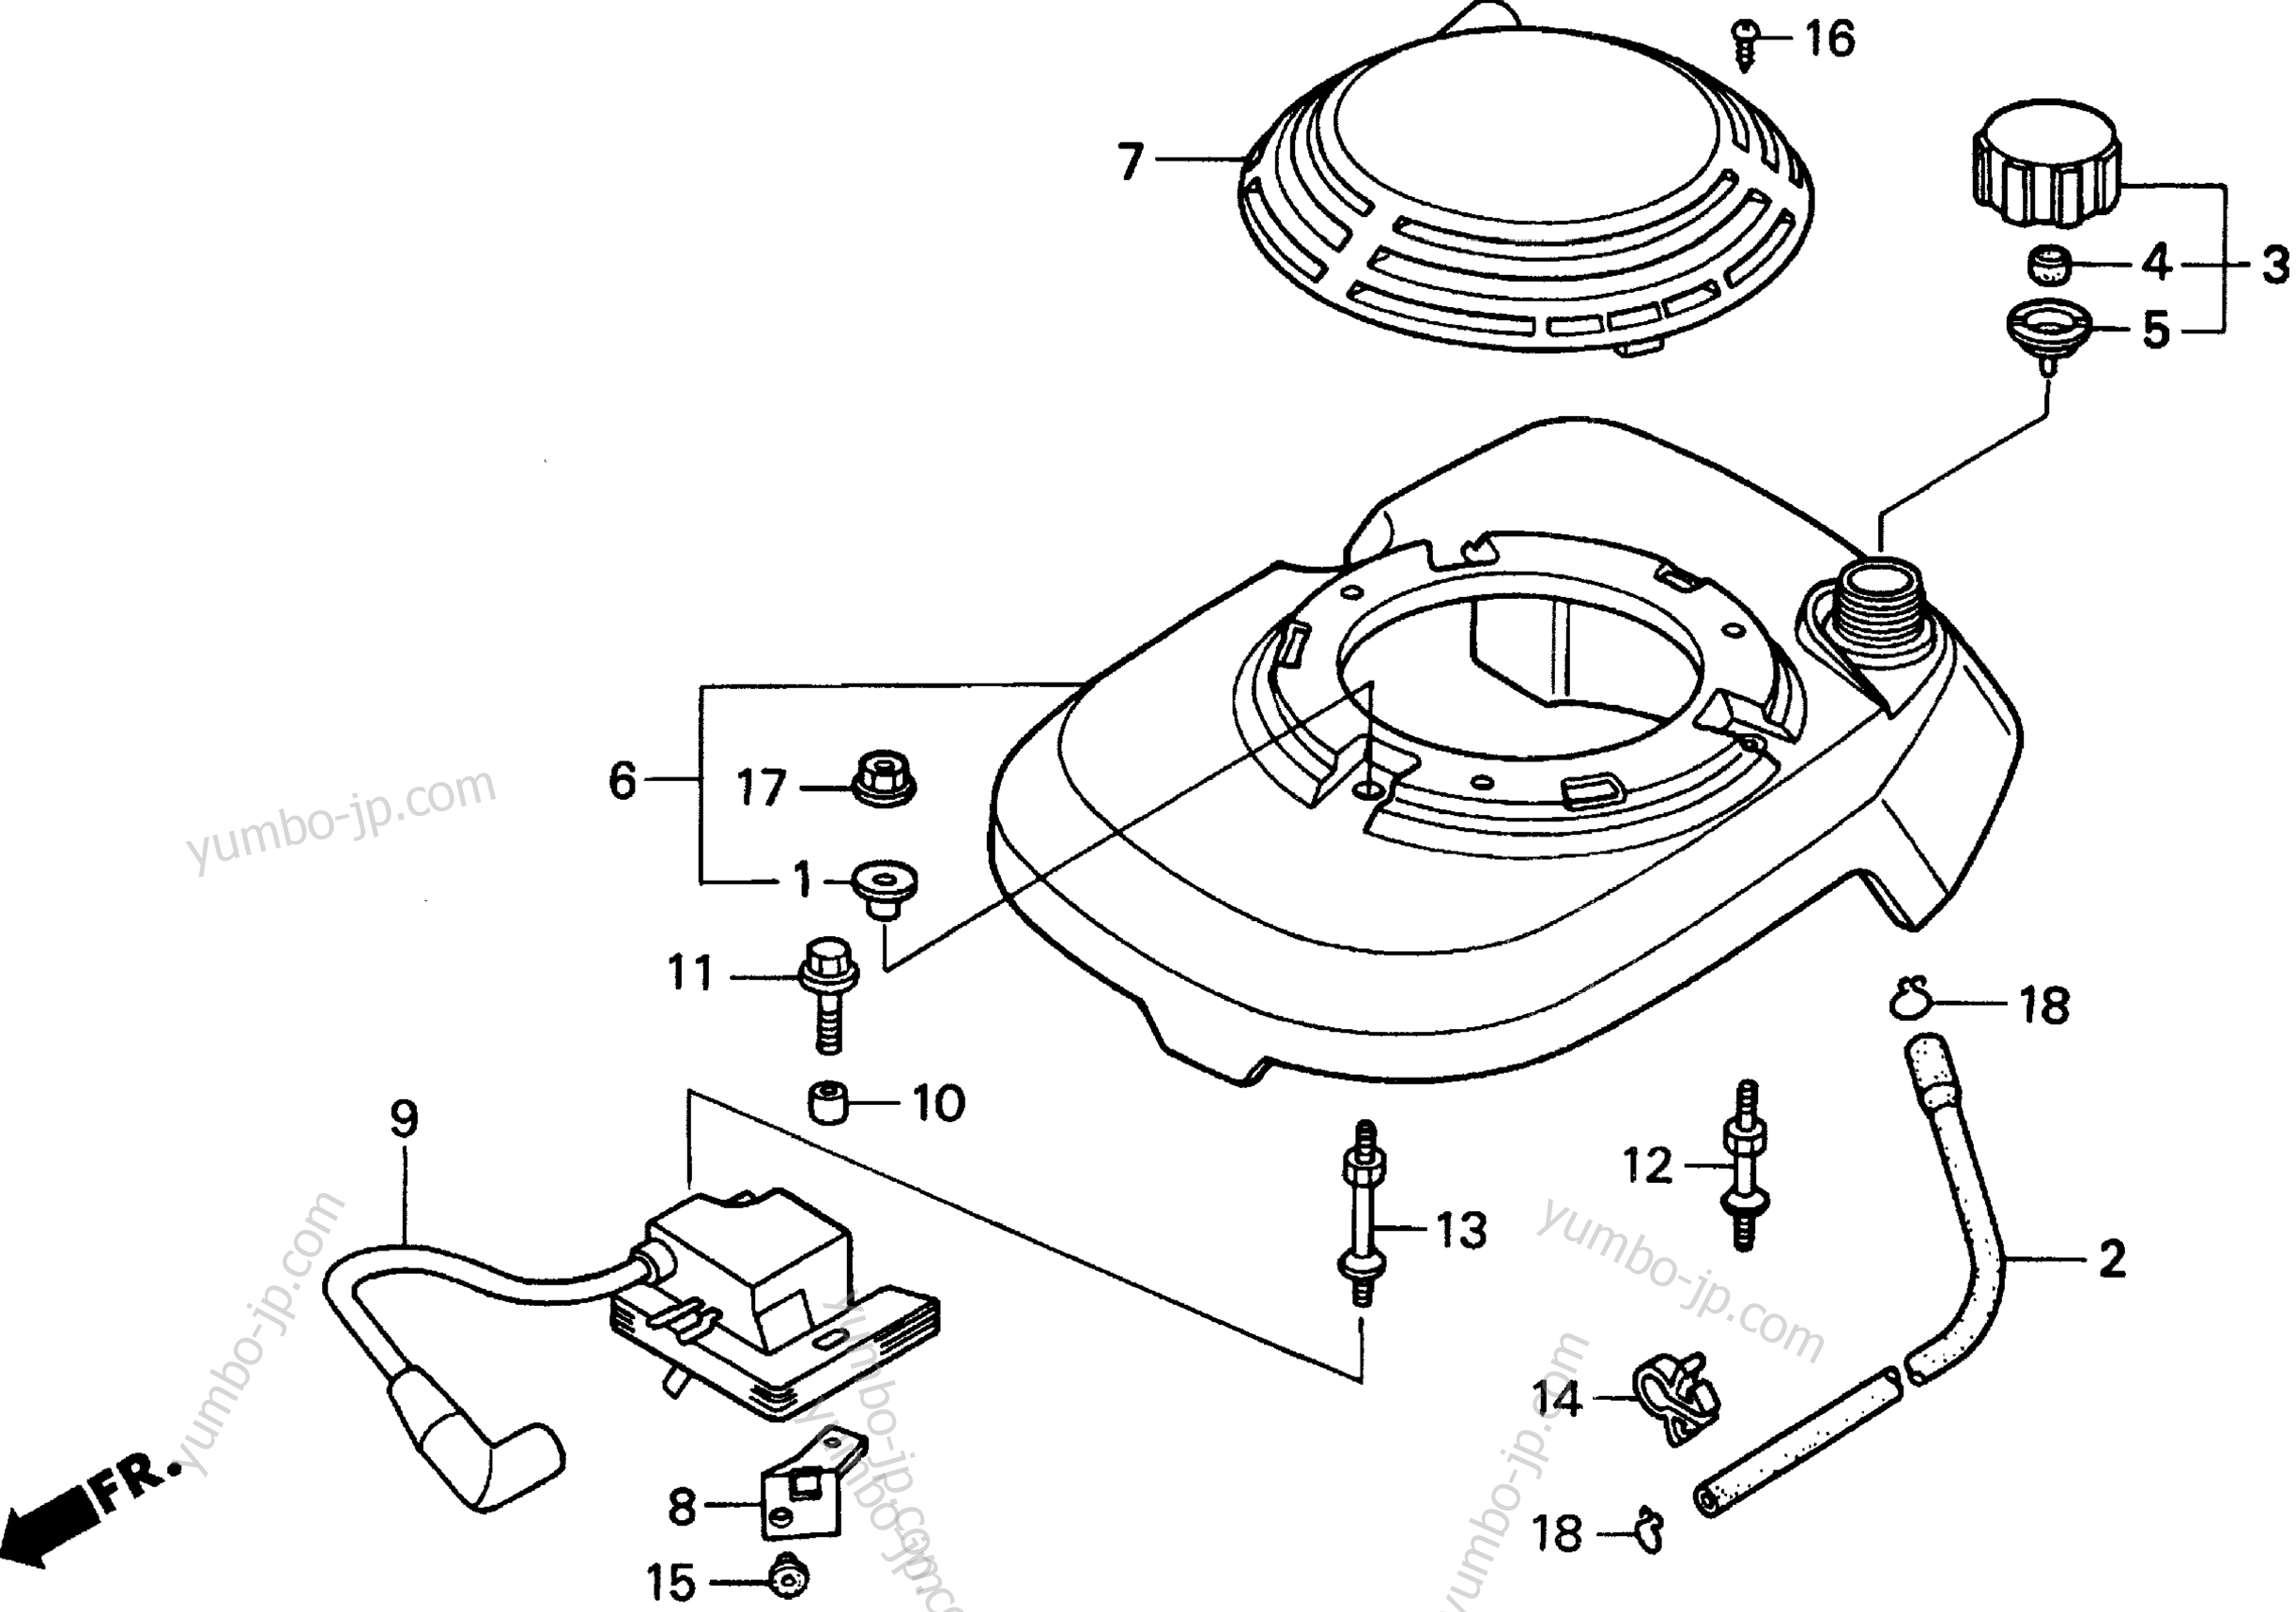 FAN COVER for lawn mowers HONDA HRM195 PA 